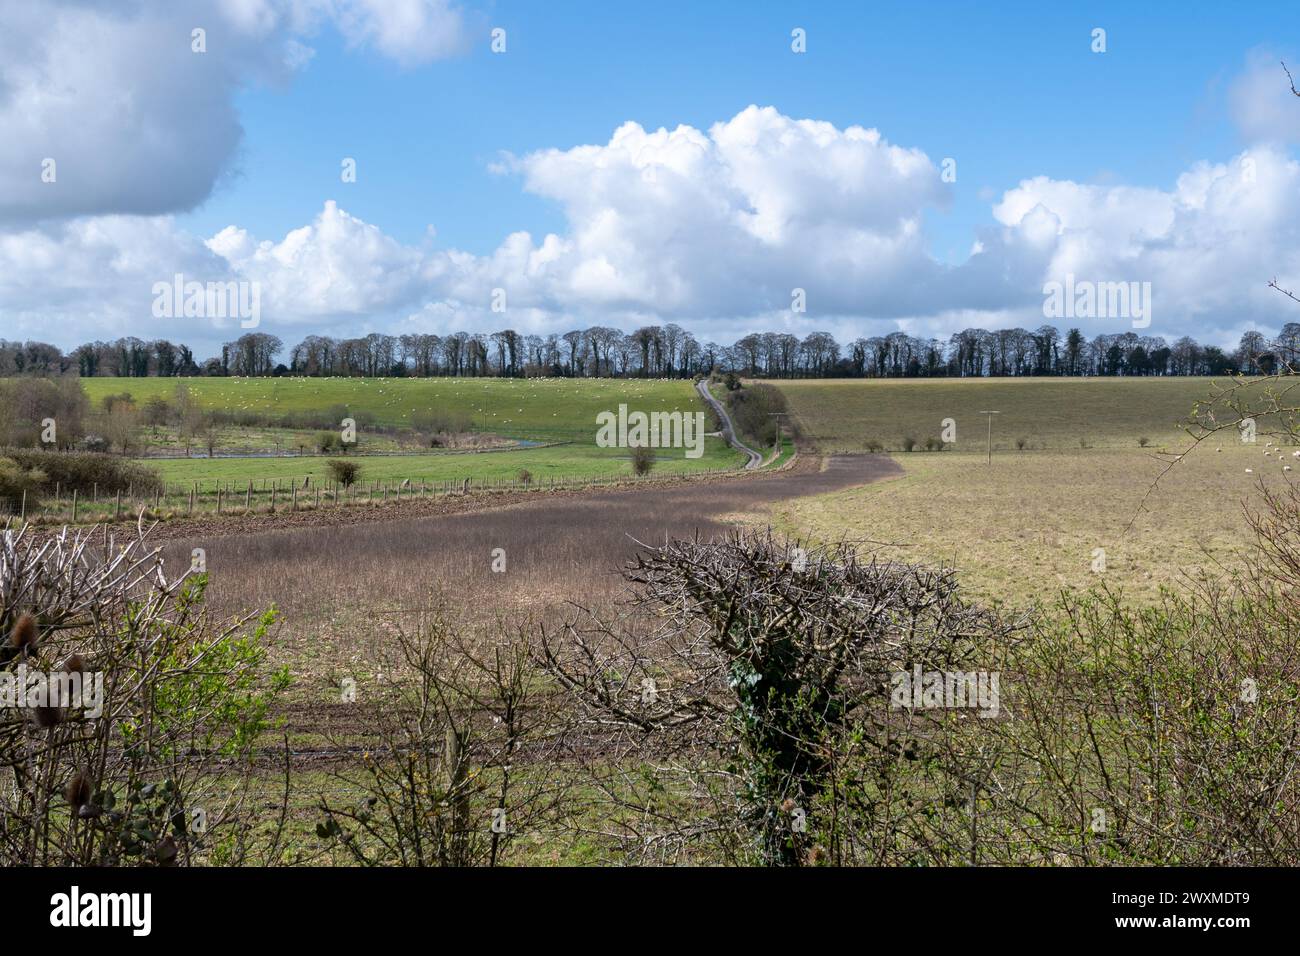 RSPB Winterbourne Downs nature reserve in Spring, Wiltshire, England, UK. A view of the rolling chalk farm landscape Stock Photo